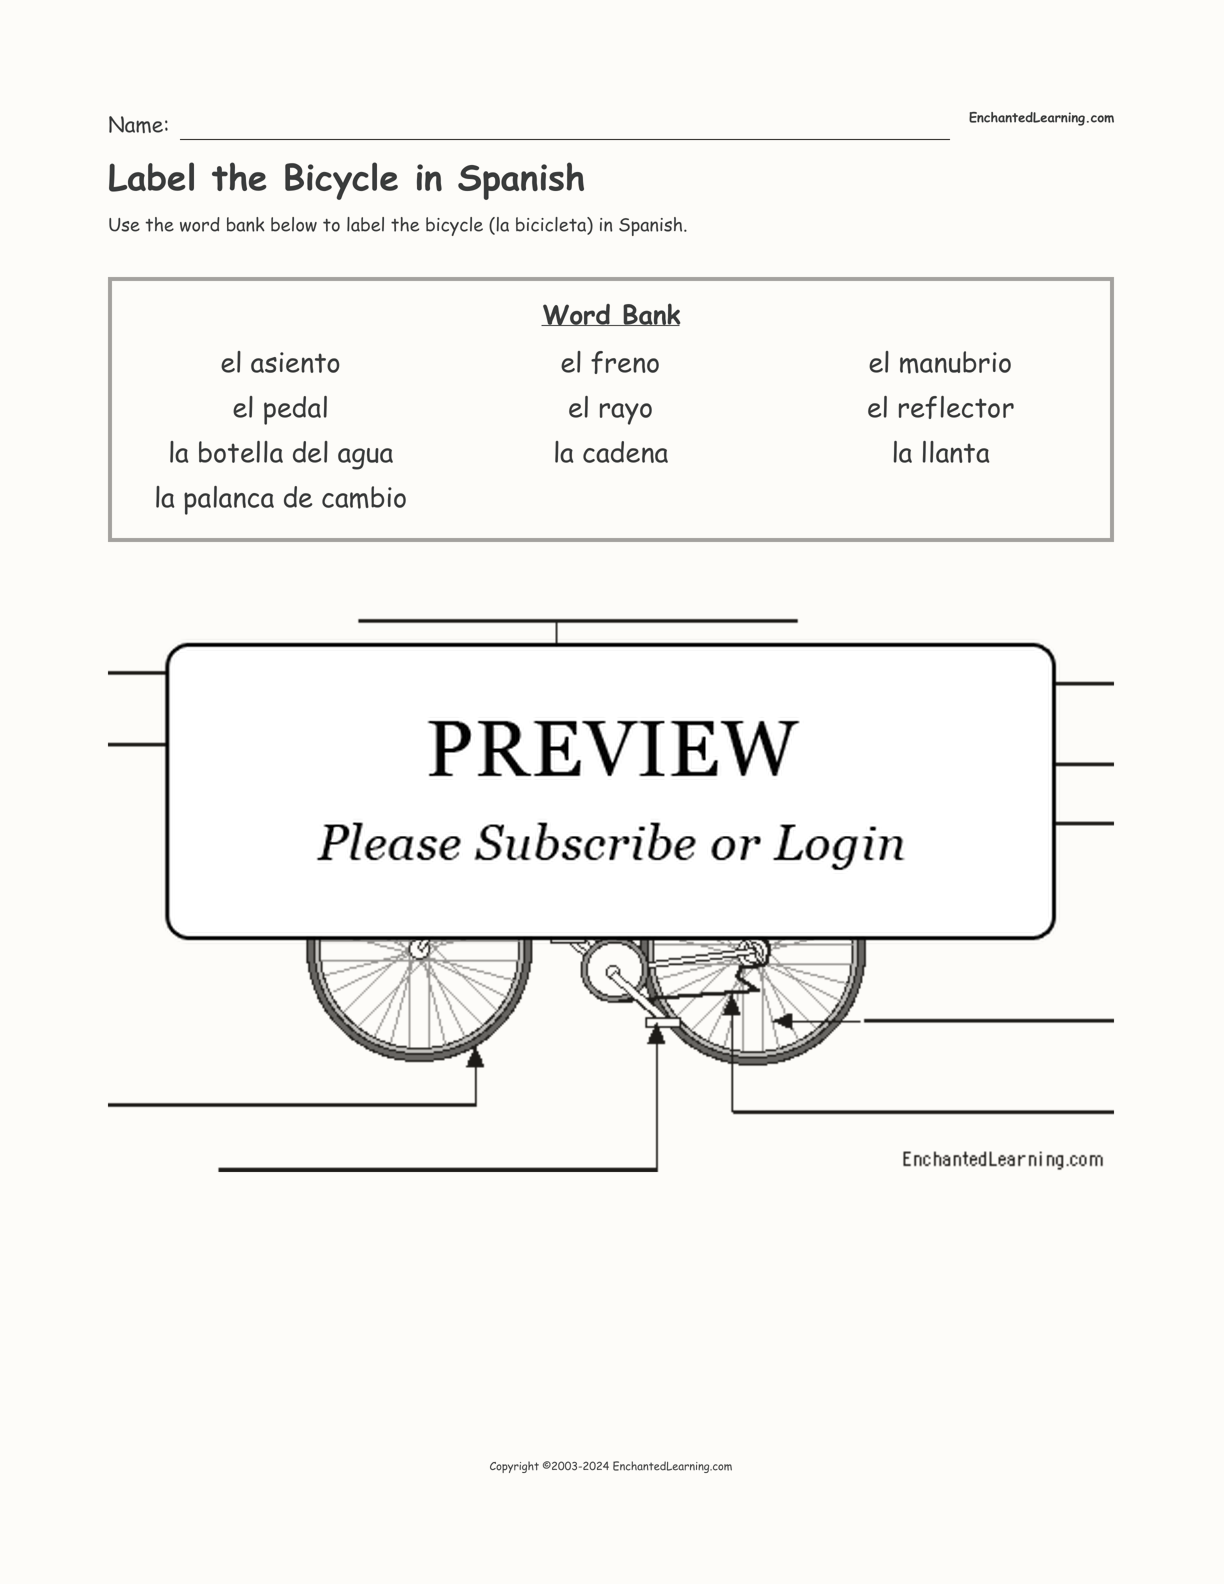 Label the Bicycle in Spanish interactive worksheet page 1